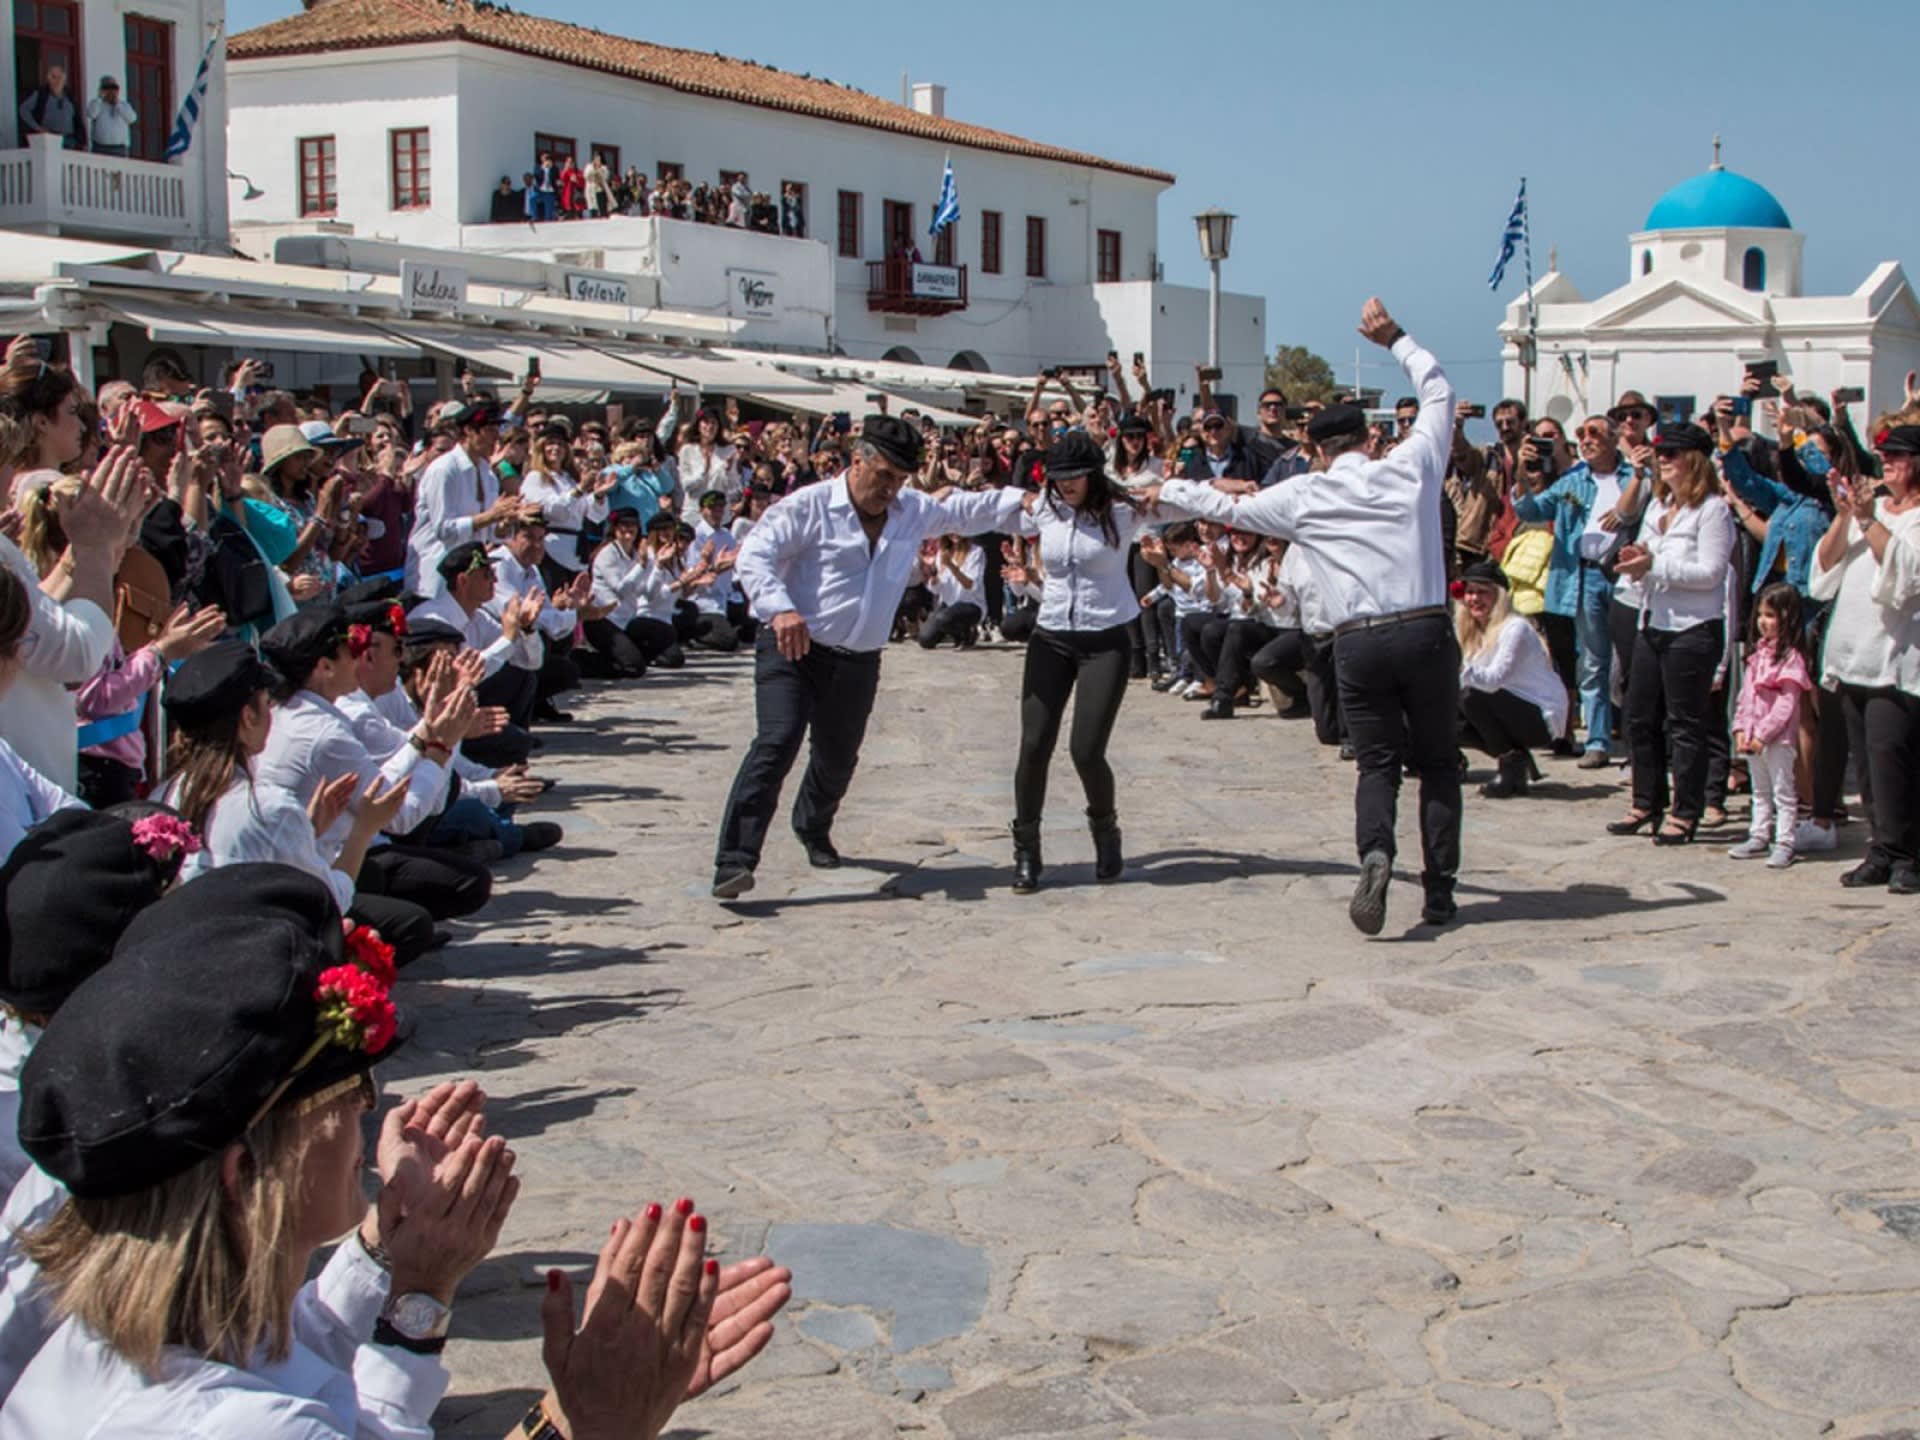 From Chania Traditional Cretan Dancing Lesson and Lunch